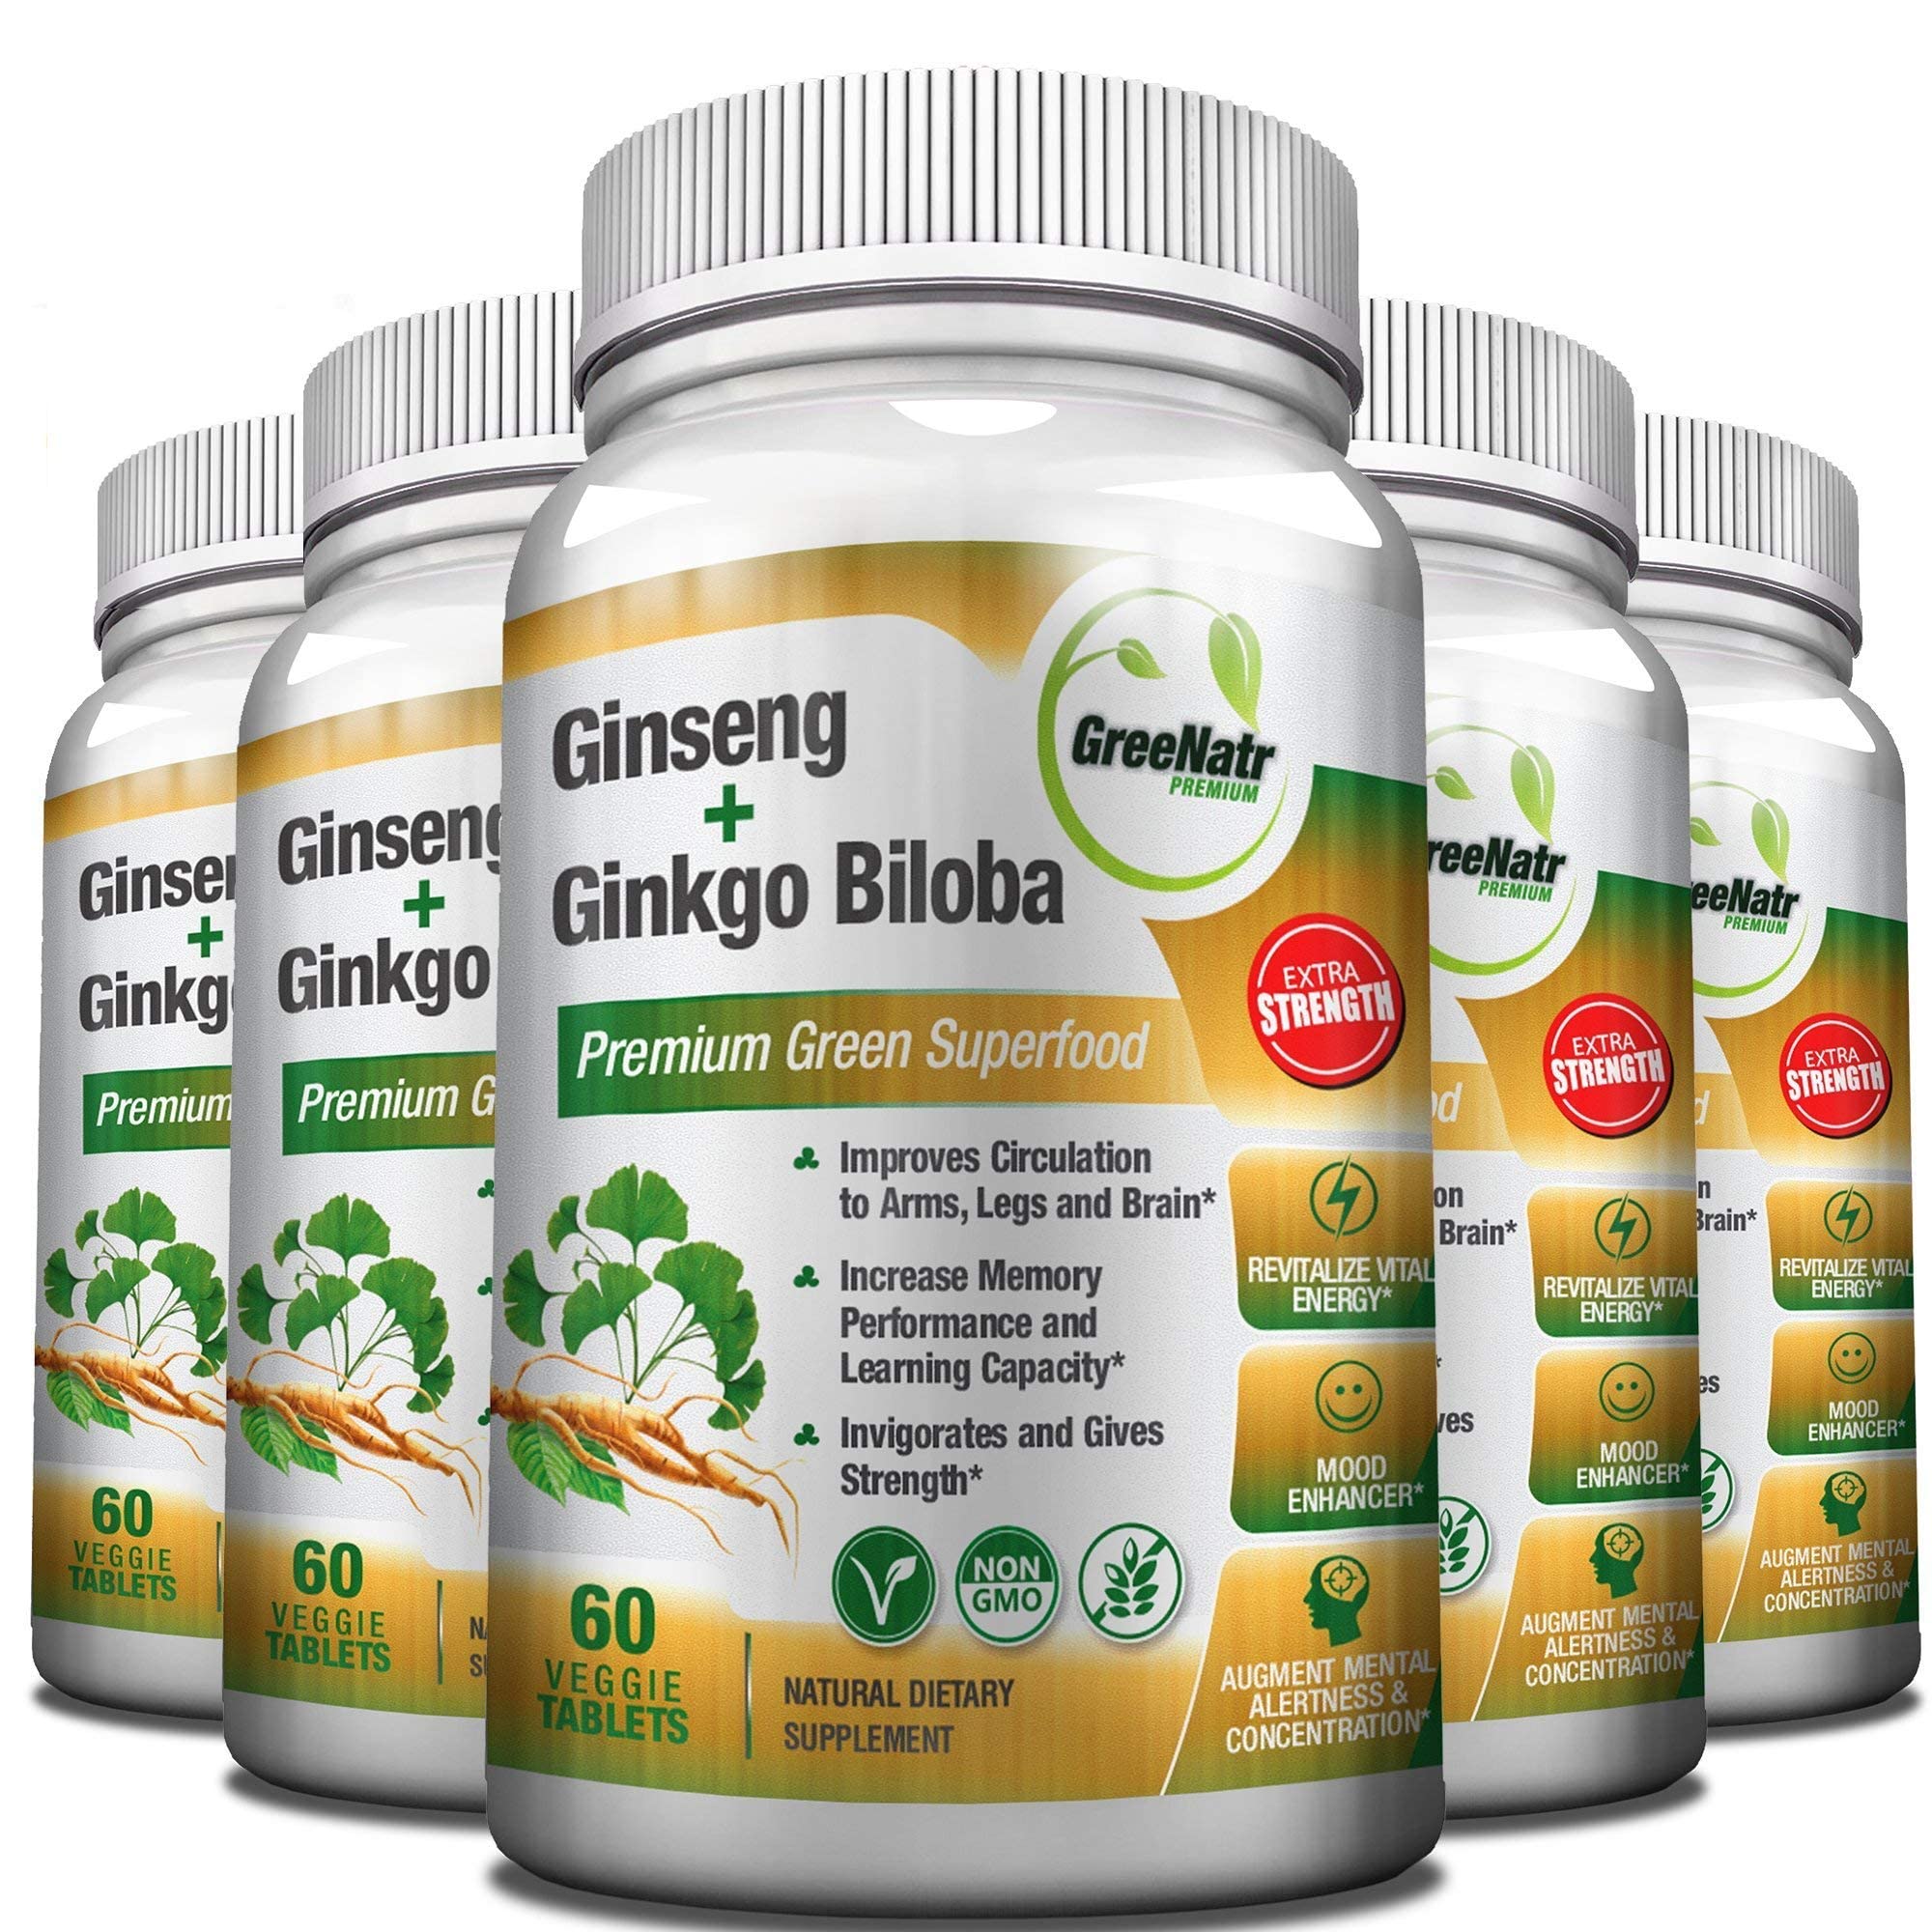 Panax Ginseng + Ginkgo Biloba Tablets – Premium Non-GMO/Veggie Superfood – Traditional Energy Booster and Brain Sharpener – Unique Twin Supplement ...